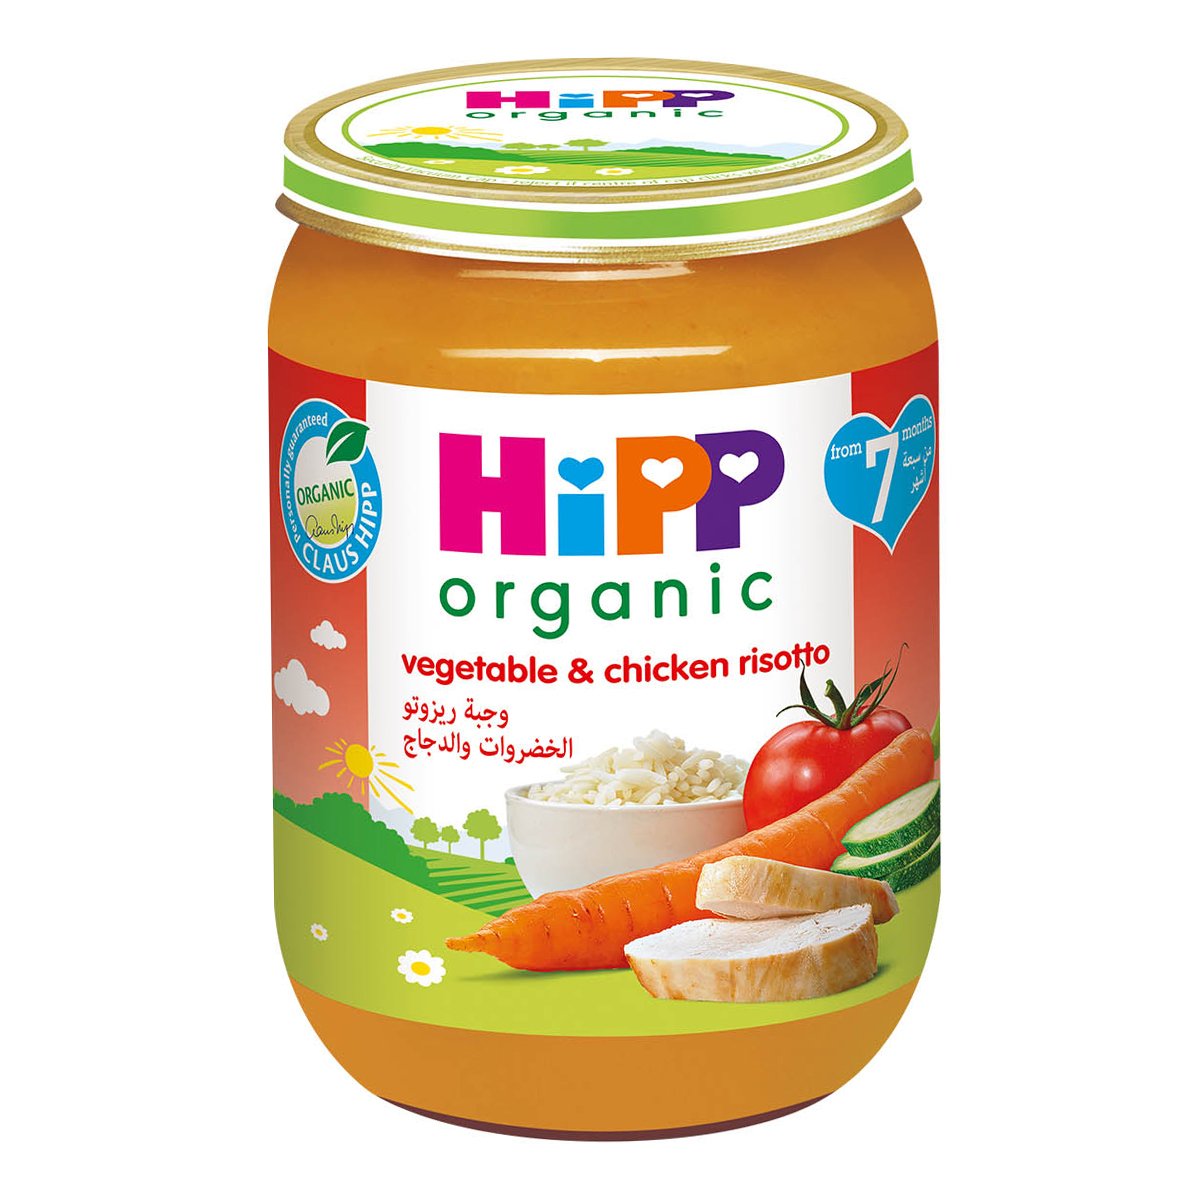 Hipp Organic Vegetable & Chicken Risotto From 7 Months 190 g